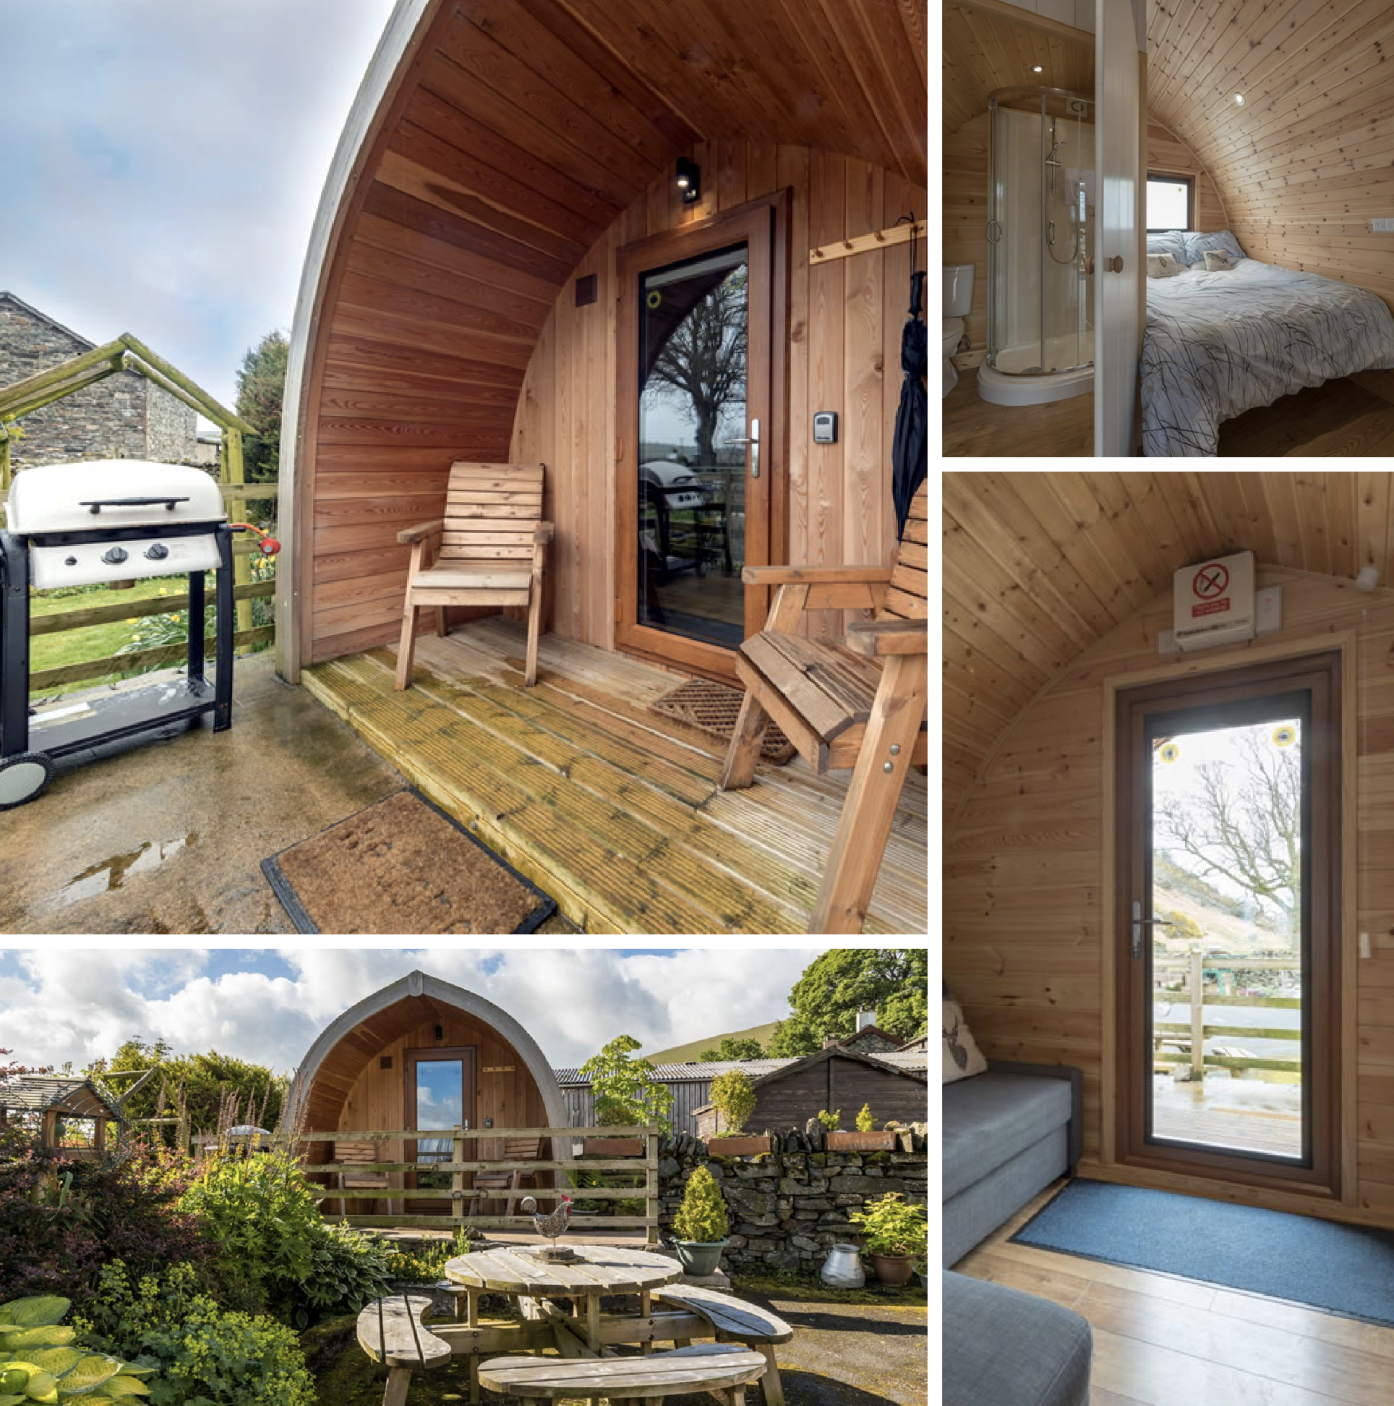 rent a Glamping Pod on a working farm in the rural north east corner of the beautiful Lake District